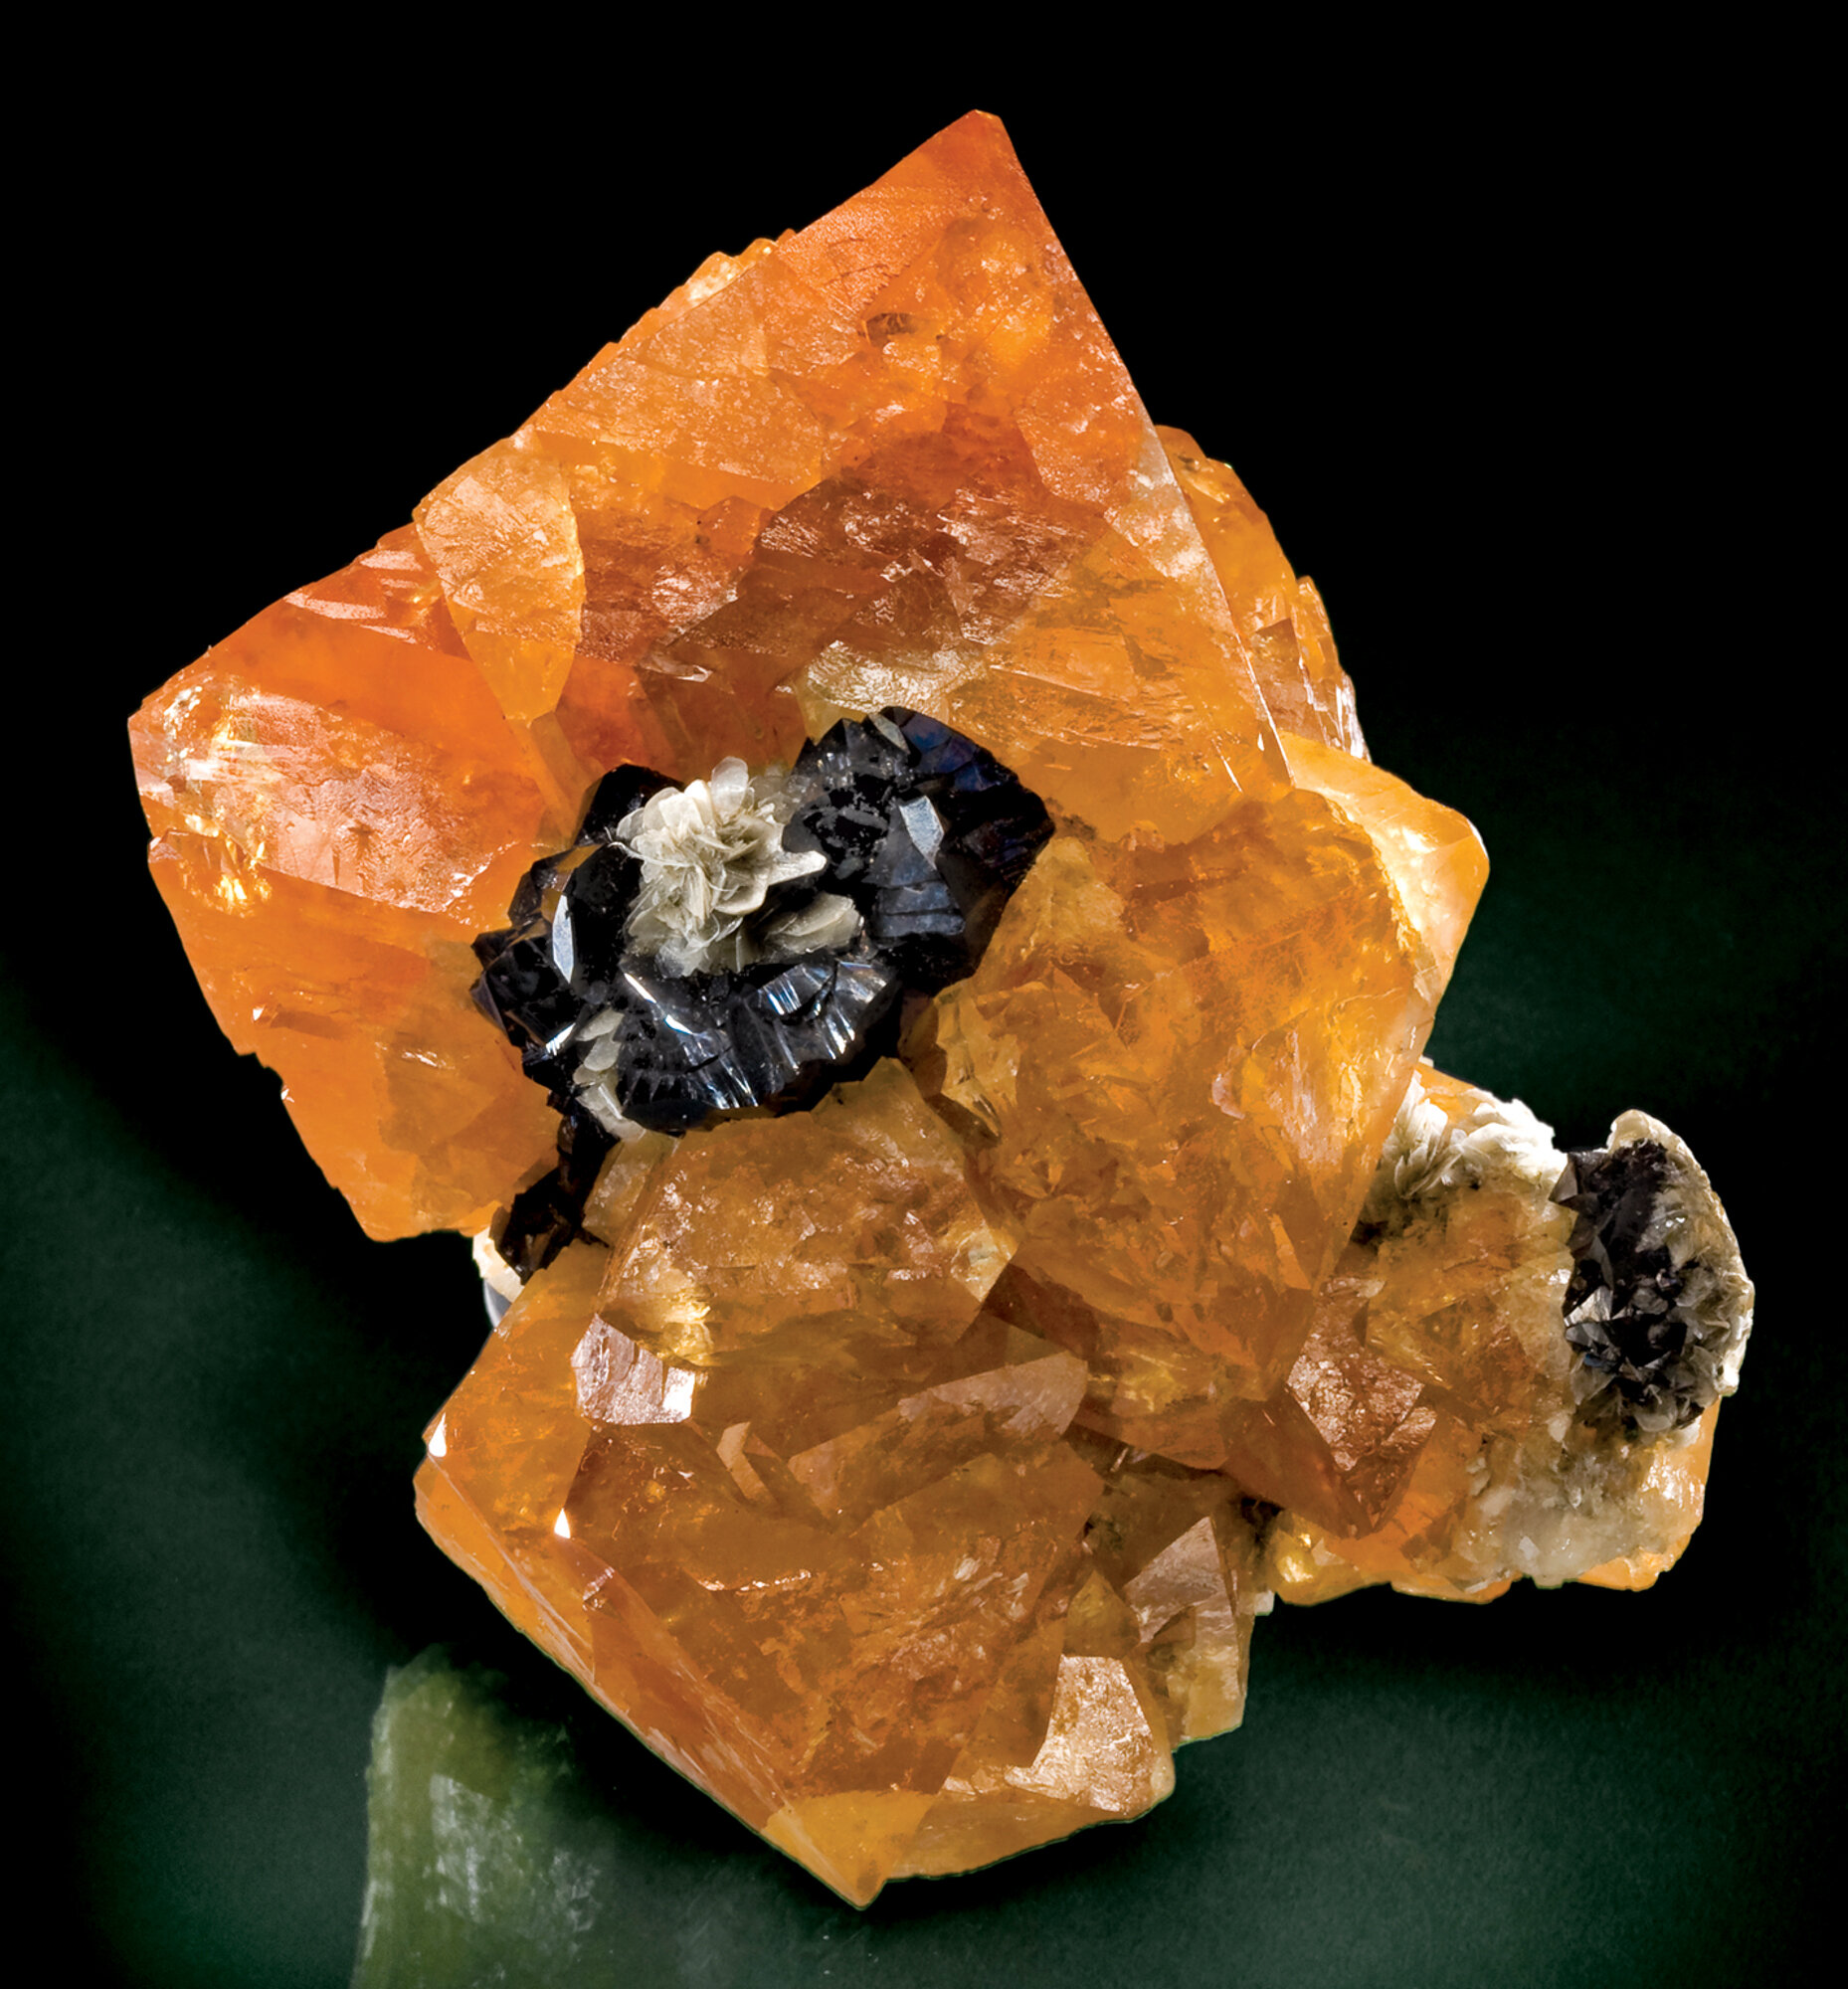  Scheelite crystal with cassiterite, 13 cm, from the Pingwu mine, Huya Township, Mt. Xuebaoding, Pingwu County, Mianyang Prefecture, Sichuan Province, China. This is an early specimen from the mid 1990s; ex Steve Smale collection. 